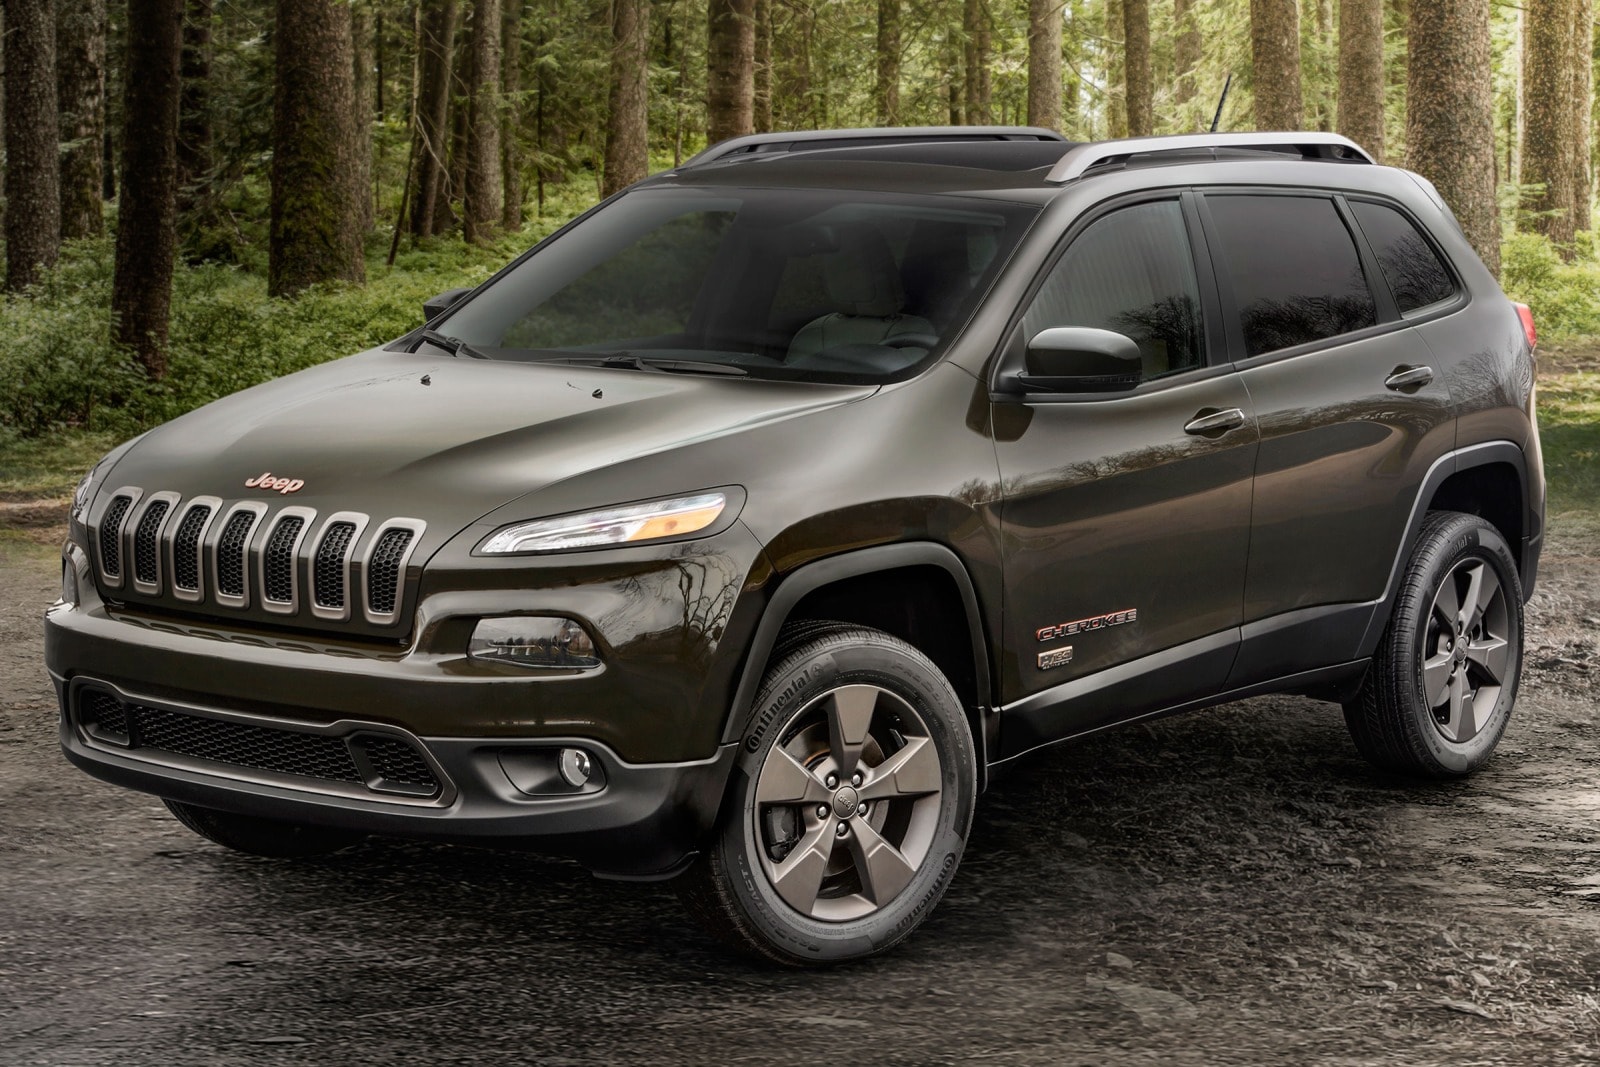 2016 Jeep Cherokee Review & Ratings | Edmunds